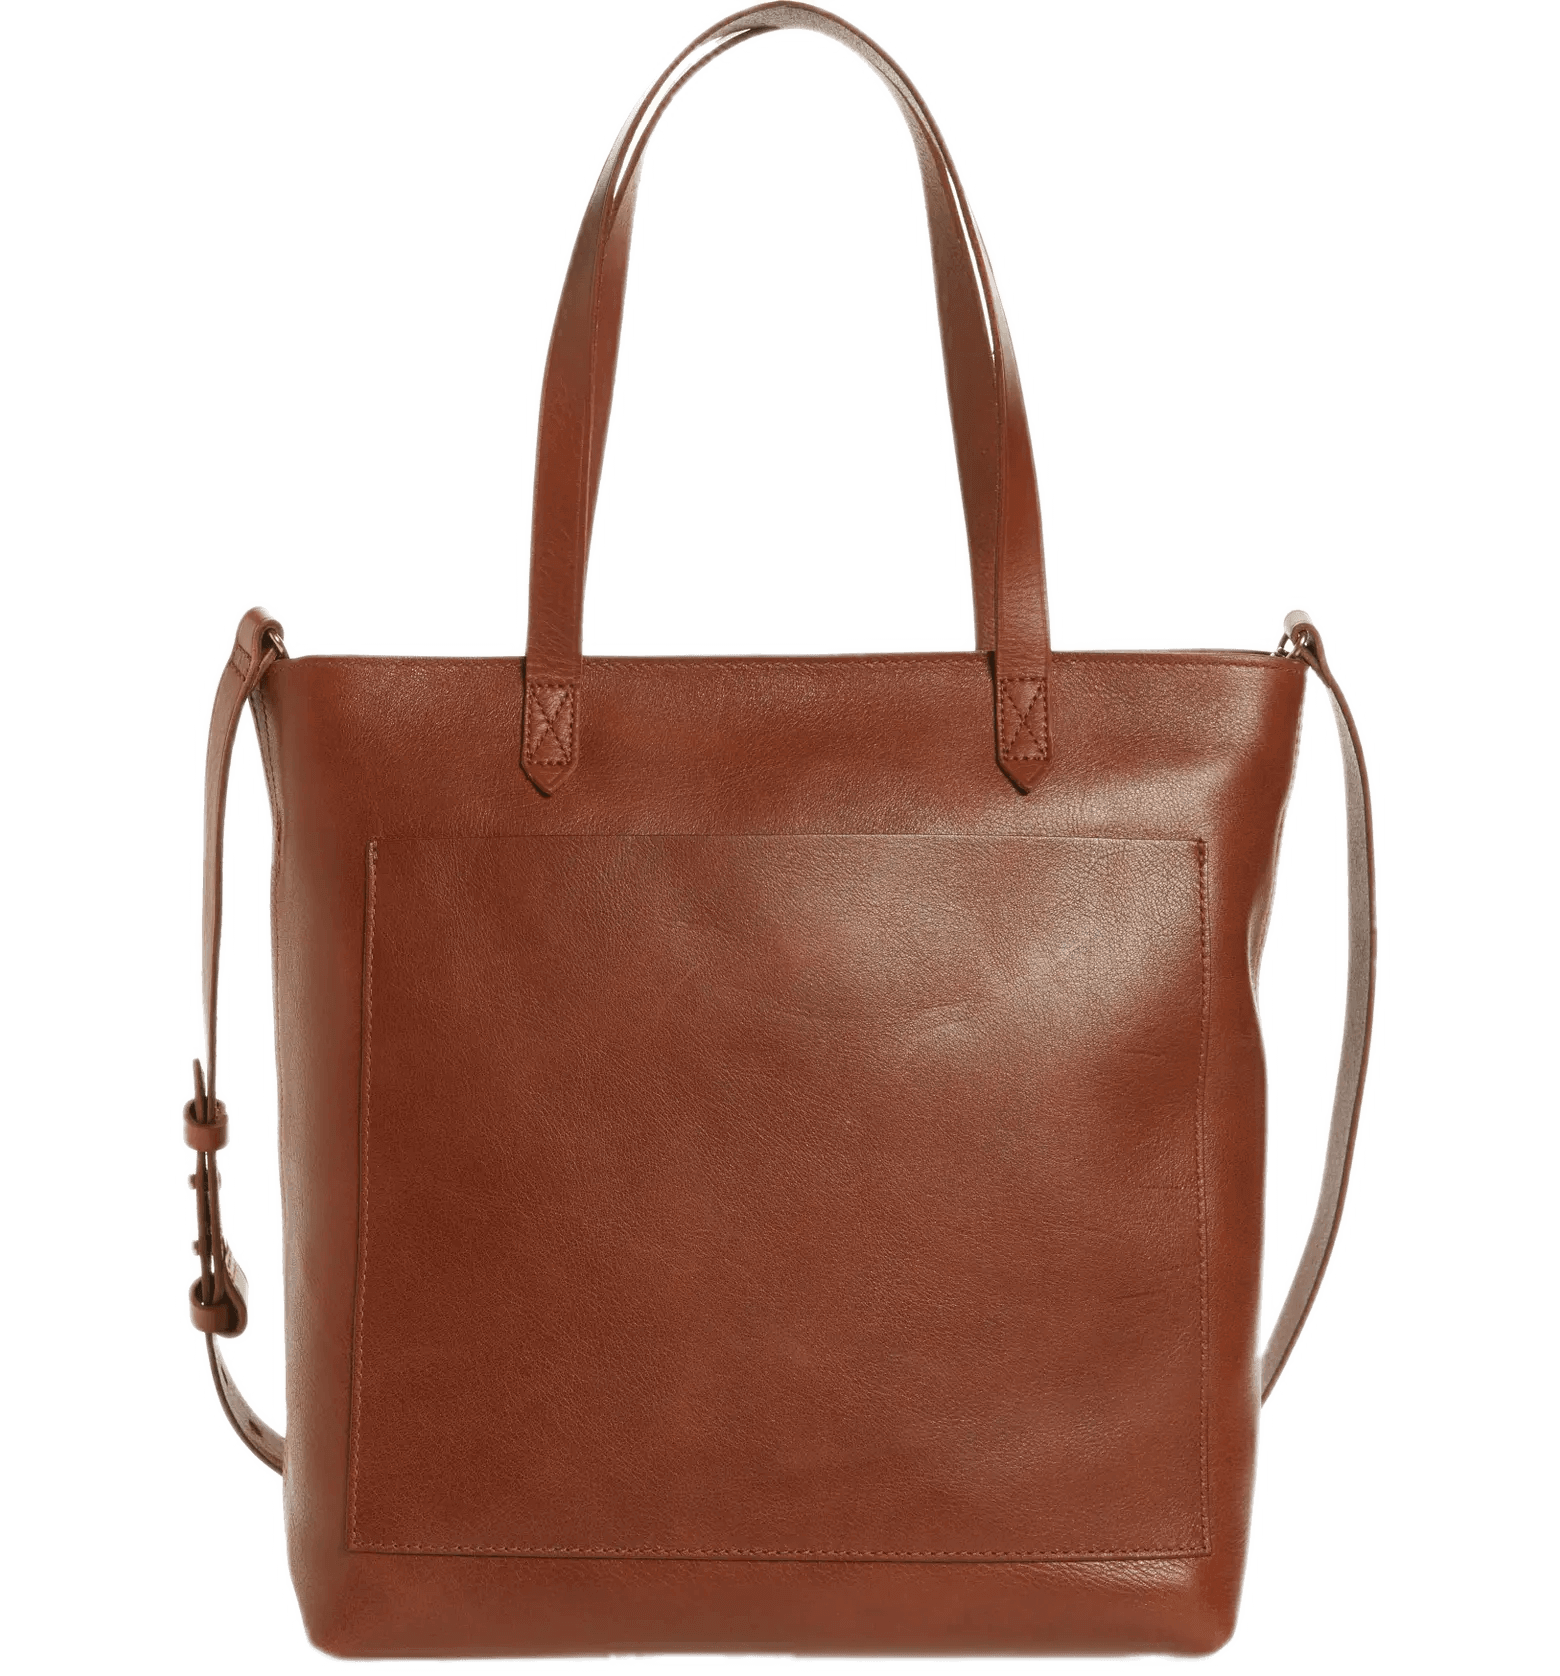 madewell transport tote bag